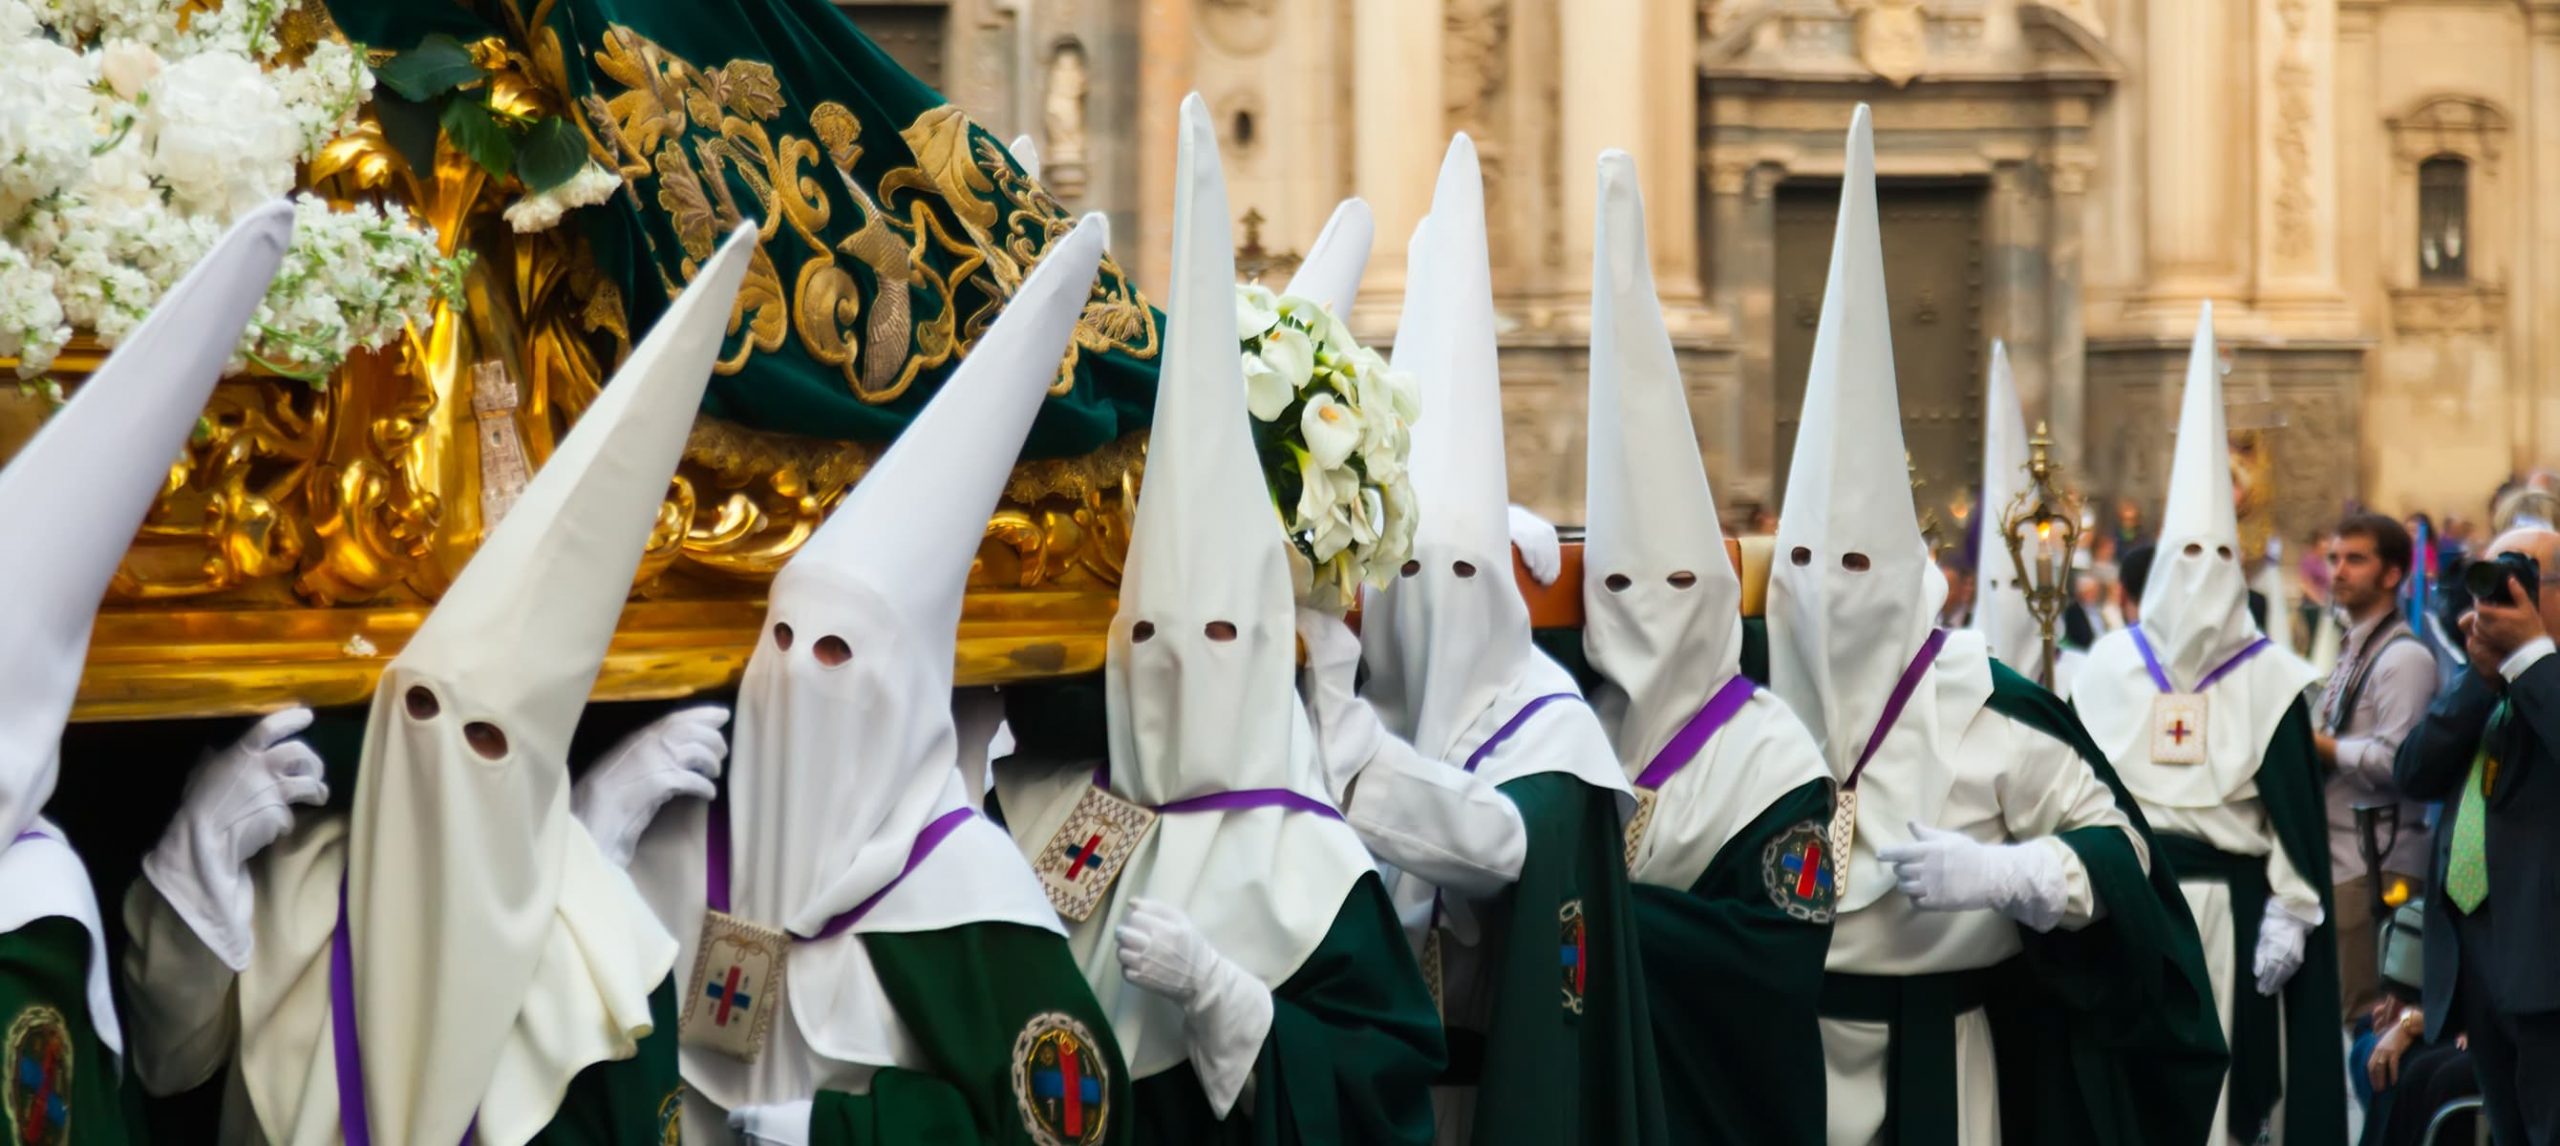 Semana Santa in Spain. Semana Santa or Holy Week is Christian religious processions on streets of Spanish cities and town